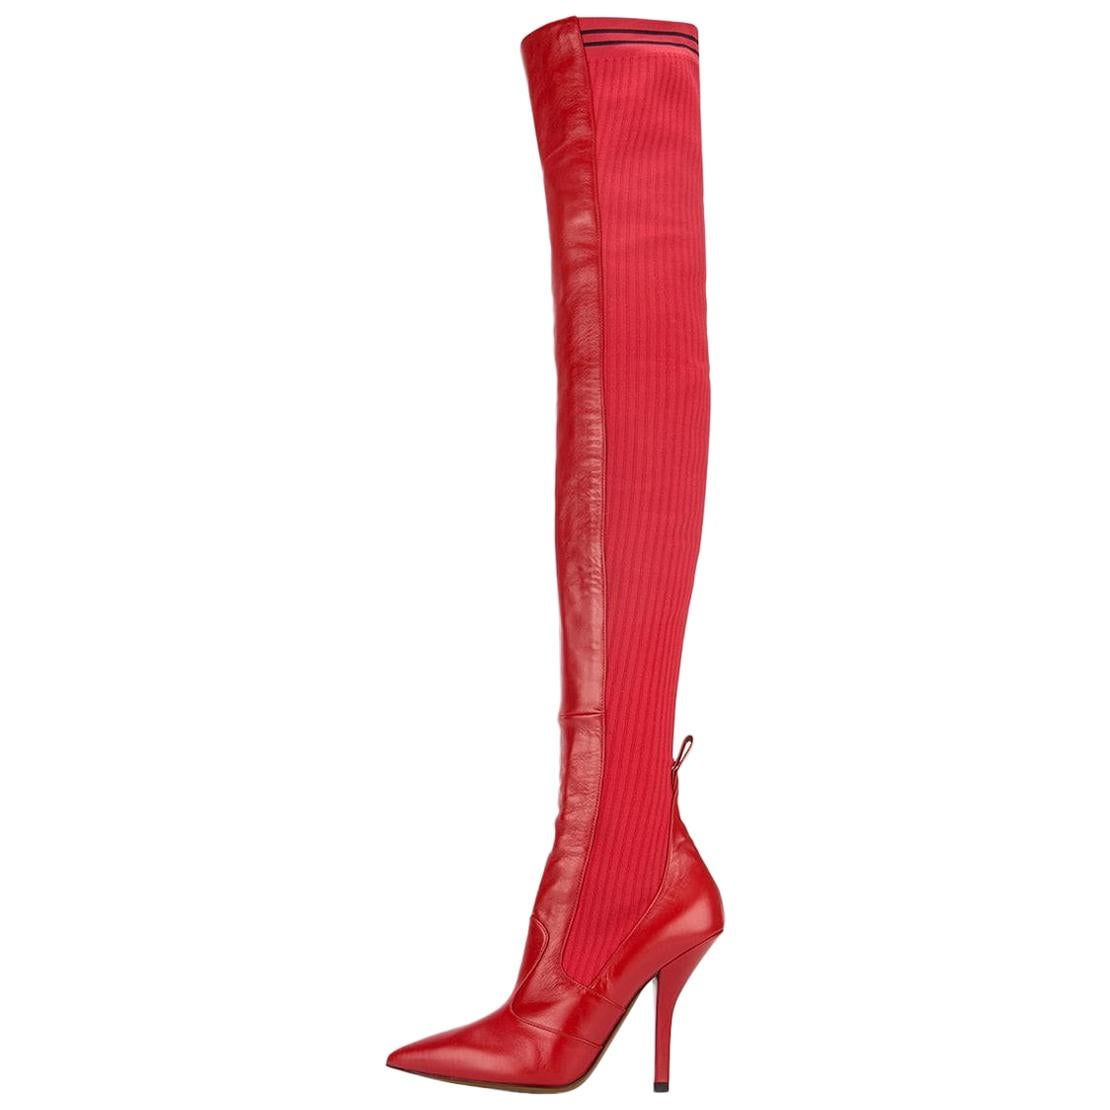 Fendi NEW Runway Red Leather Knit Sock Thigh High Evening Heels Boots 